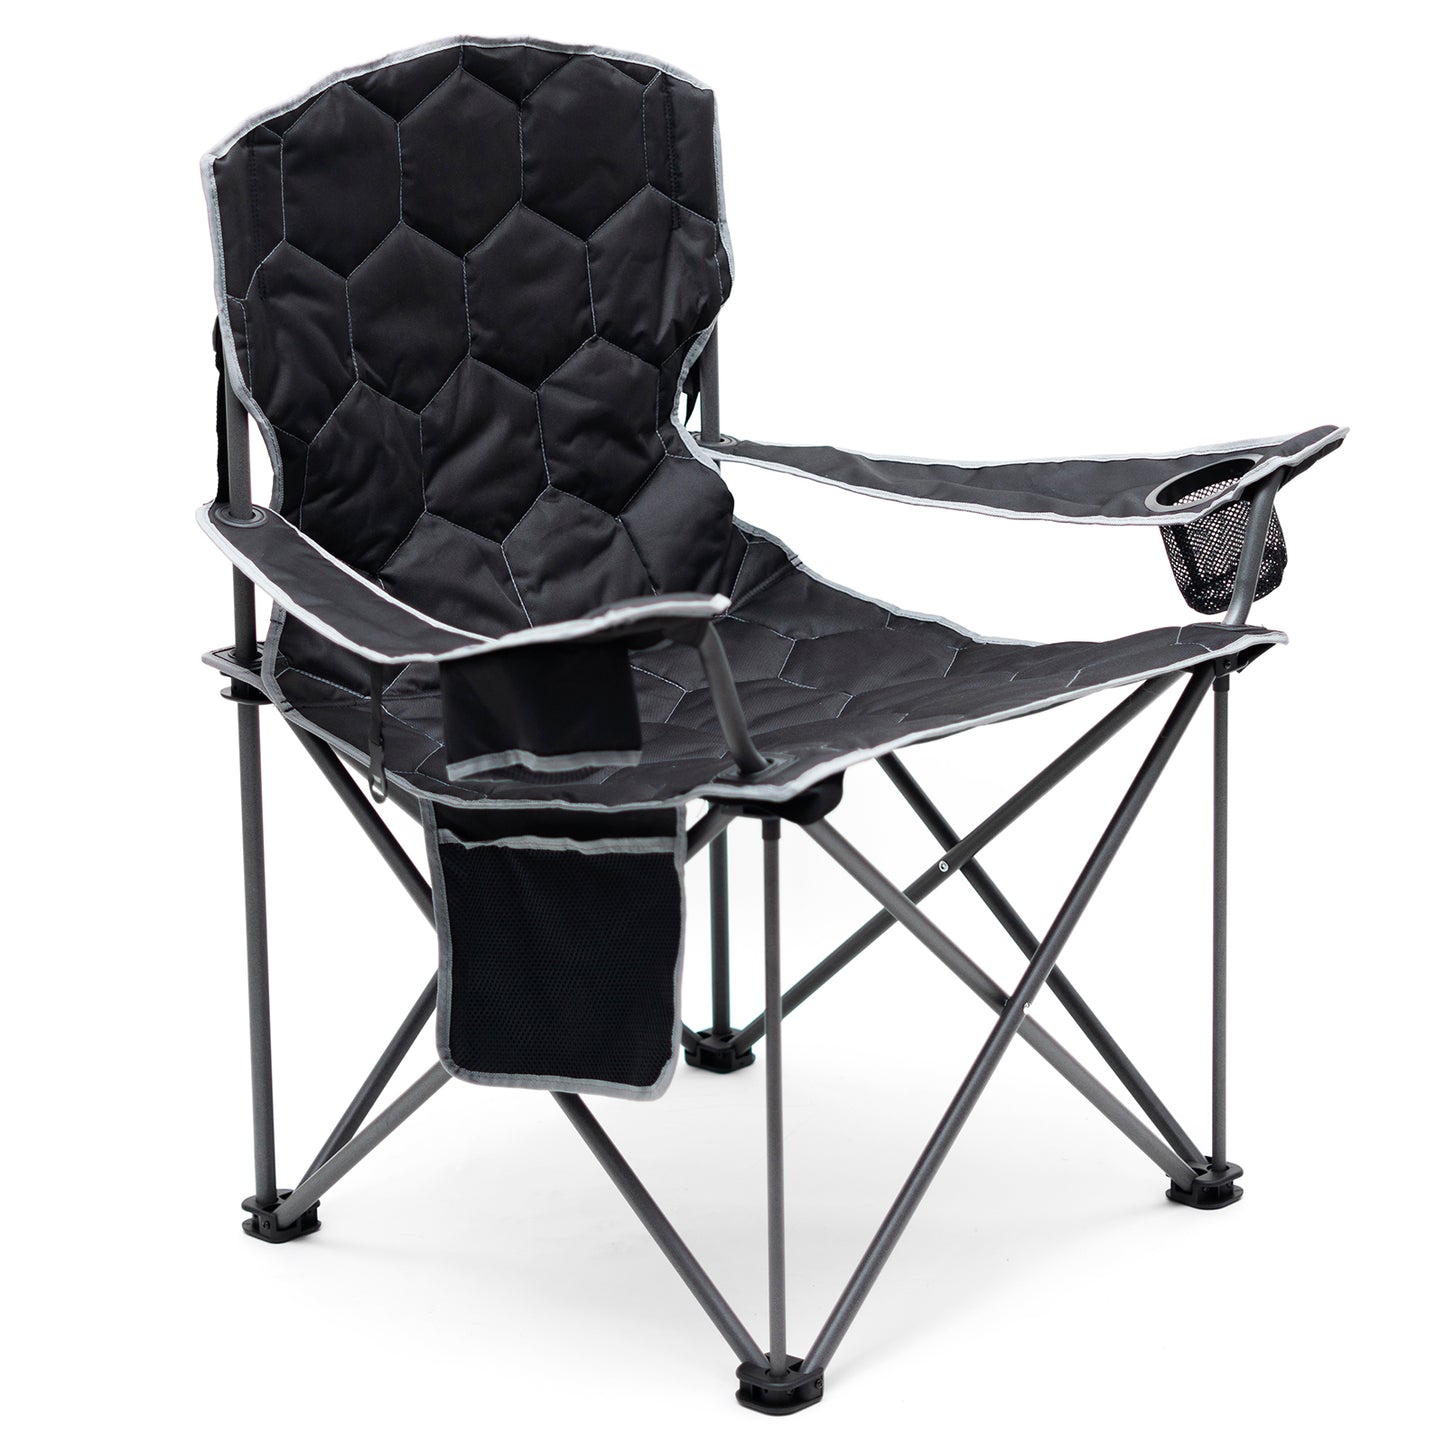 SunnyFeel AC2002E Giant Camping Chair